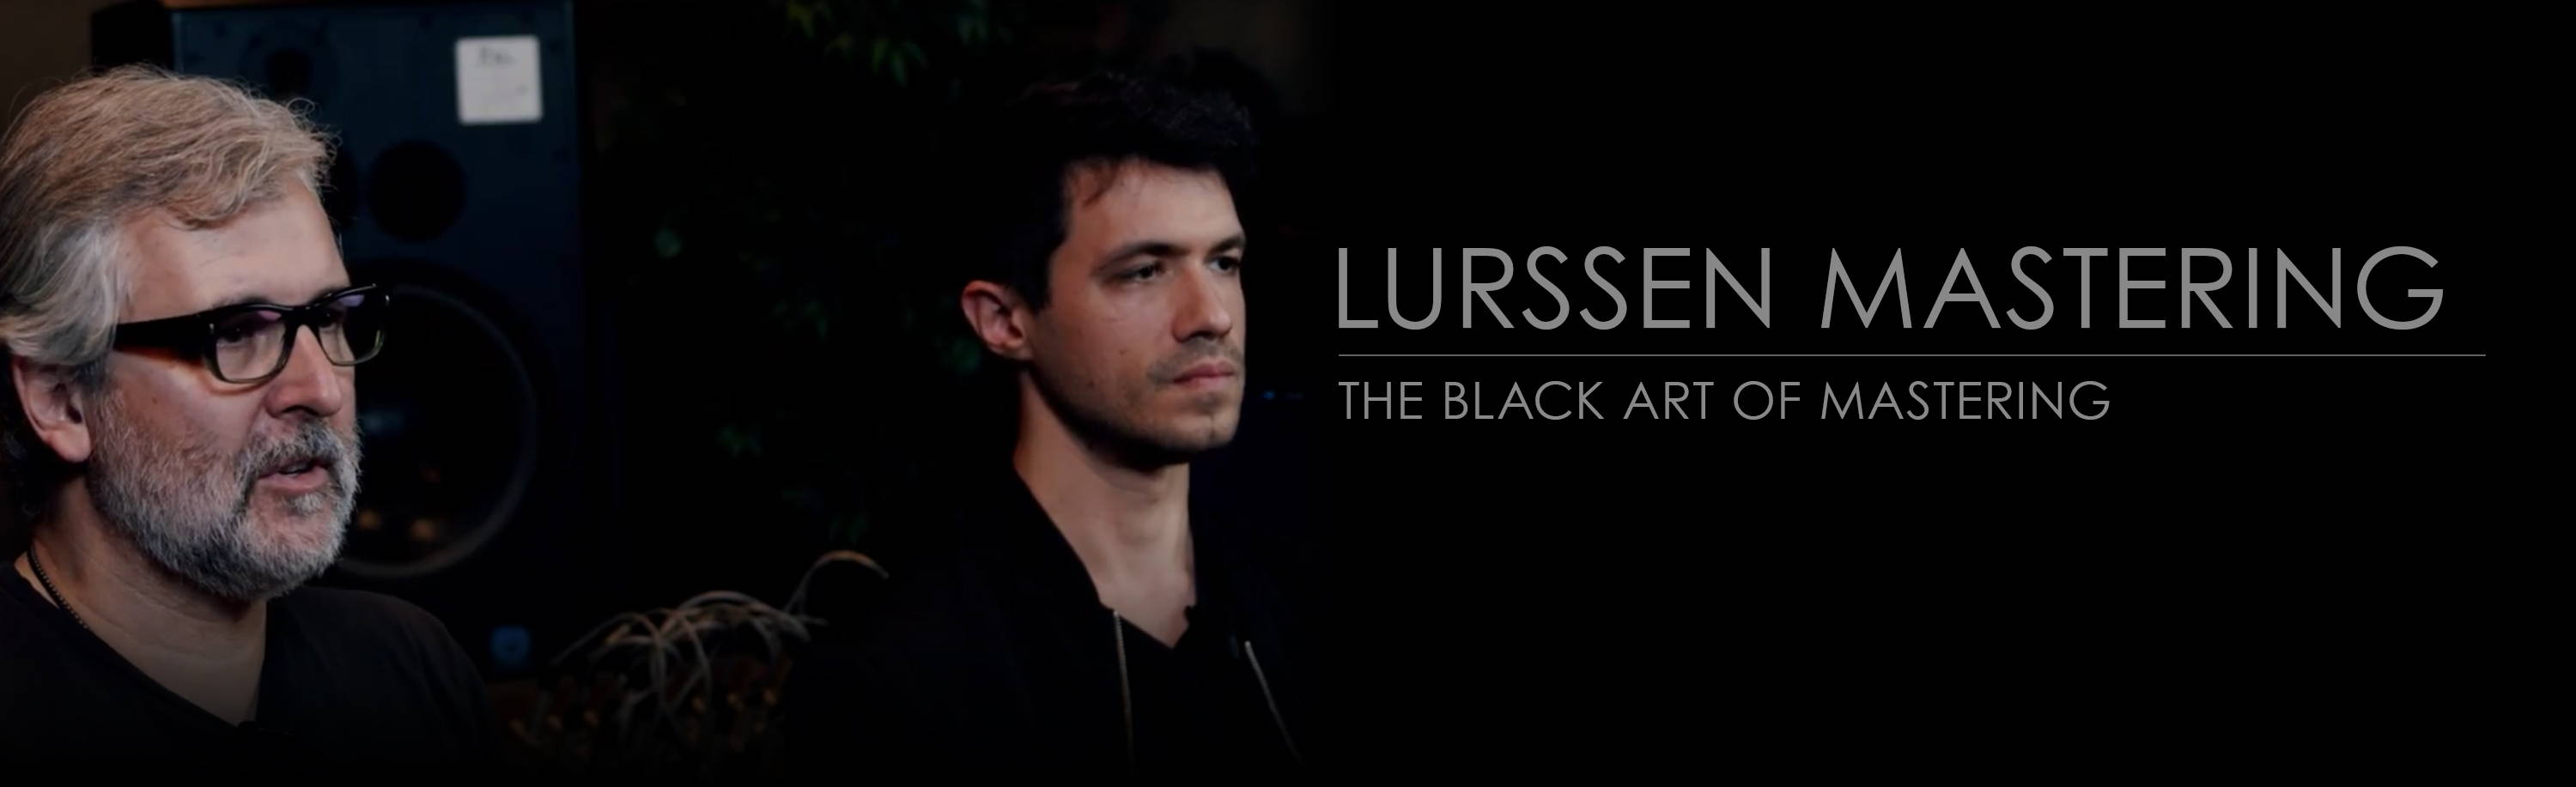 Audeze Live: Our video series with Lurssen Mastering